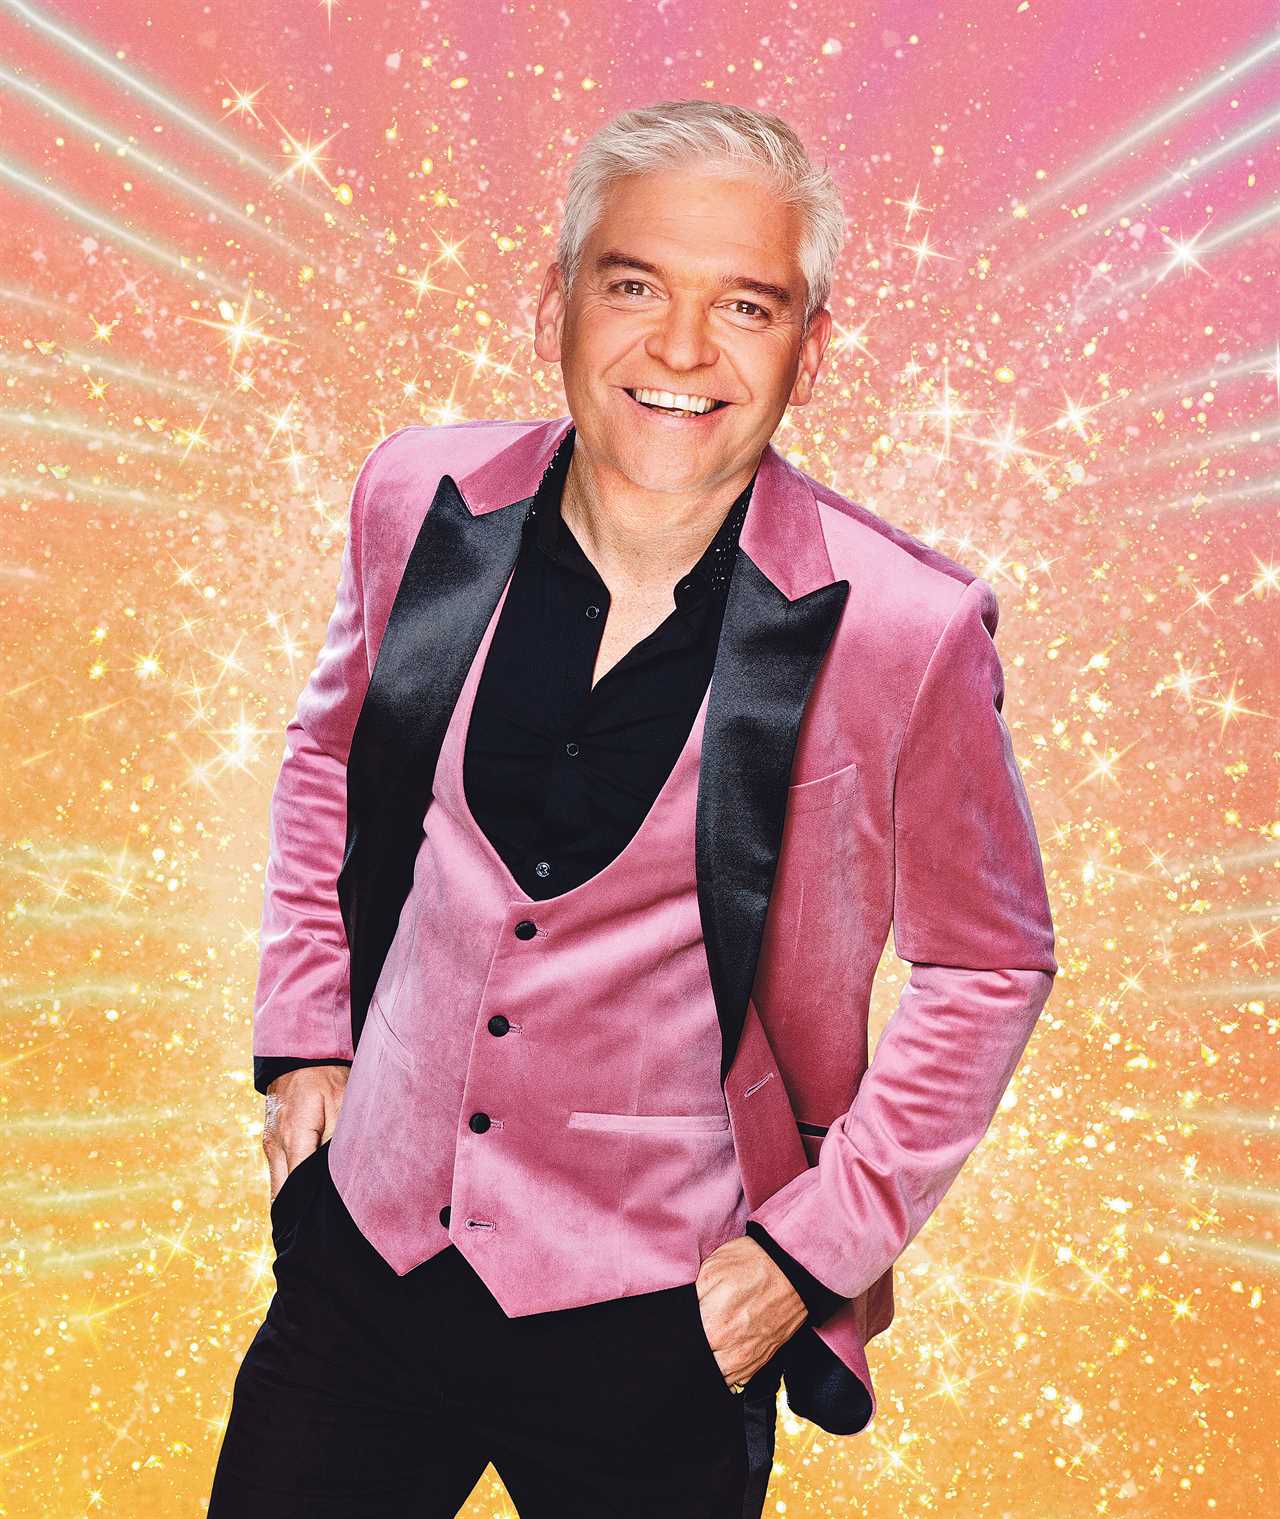 Major BBC TV show has Phillip Schofield in its sights after his This Morning axe over feud with Holly Willoughby